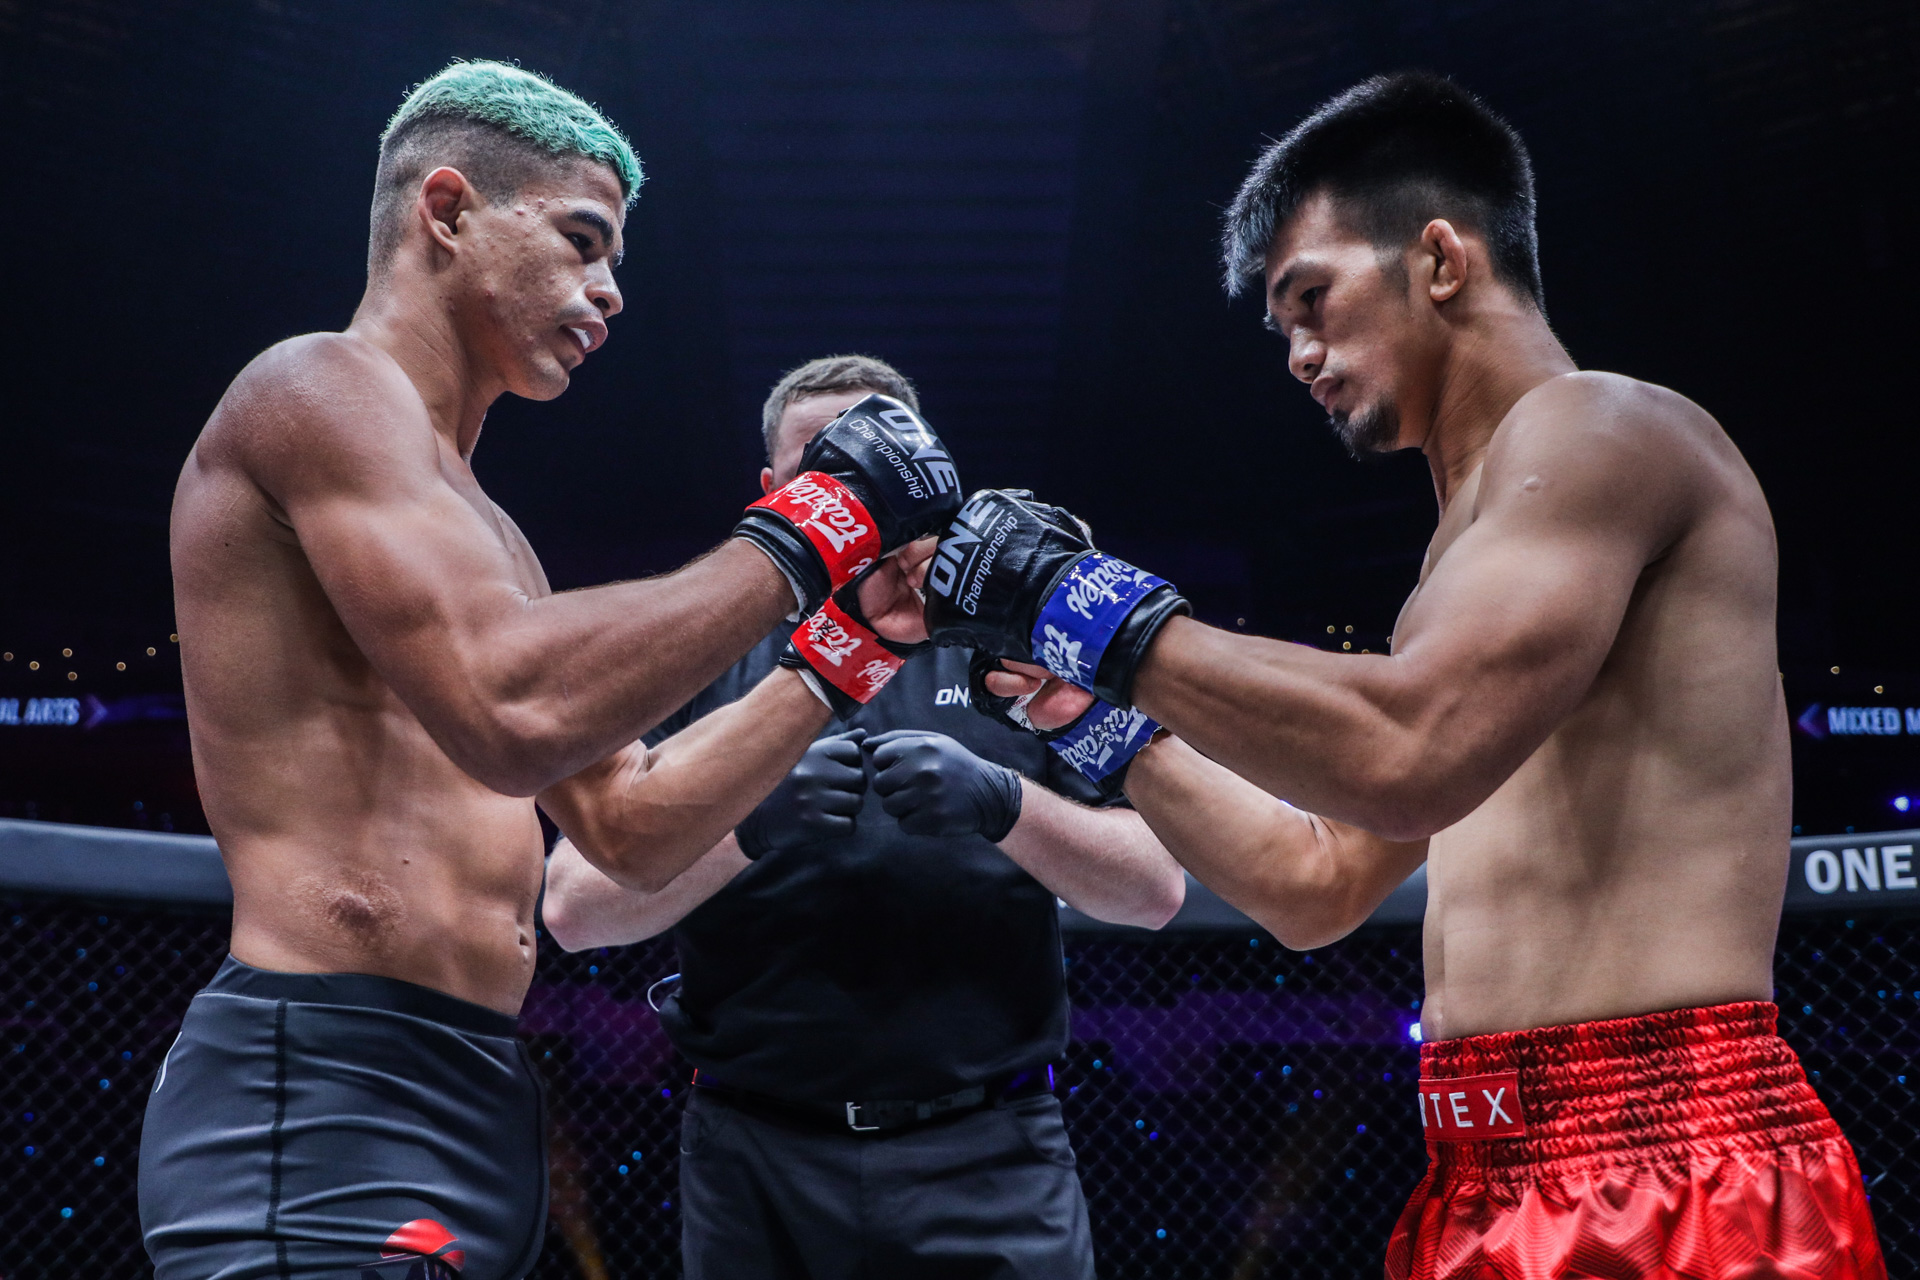 ONE-Full-Circle-Andrade-def-Pacatiw-2 Three challengers for new ONE champ John Lineker Mixed Martial Arts News ONE Championship  - philippine sports news